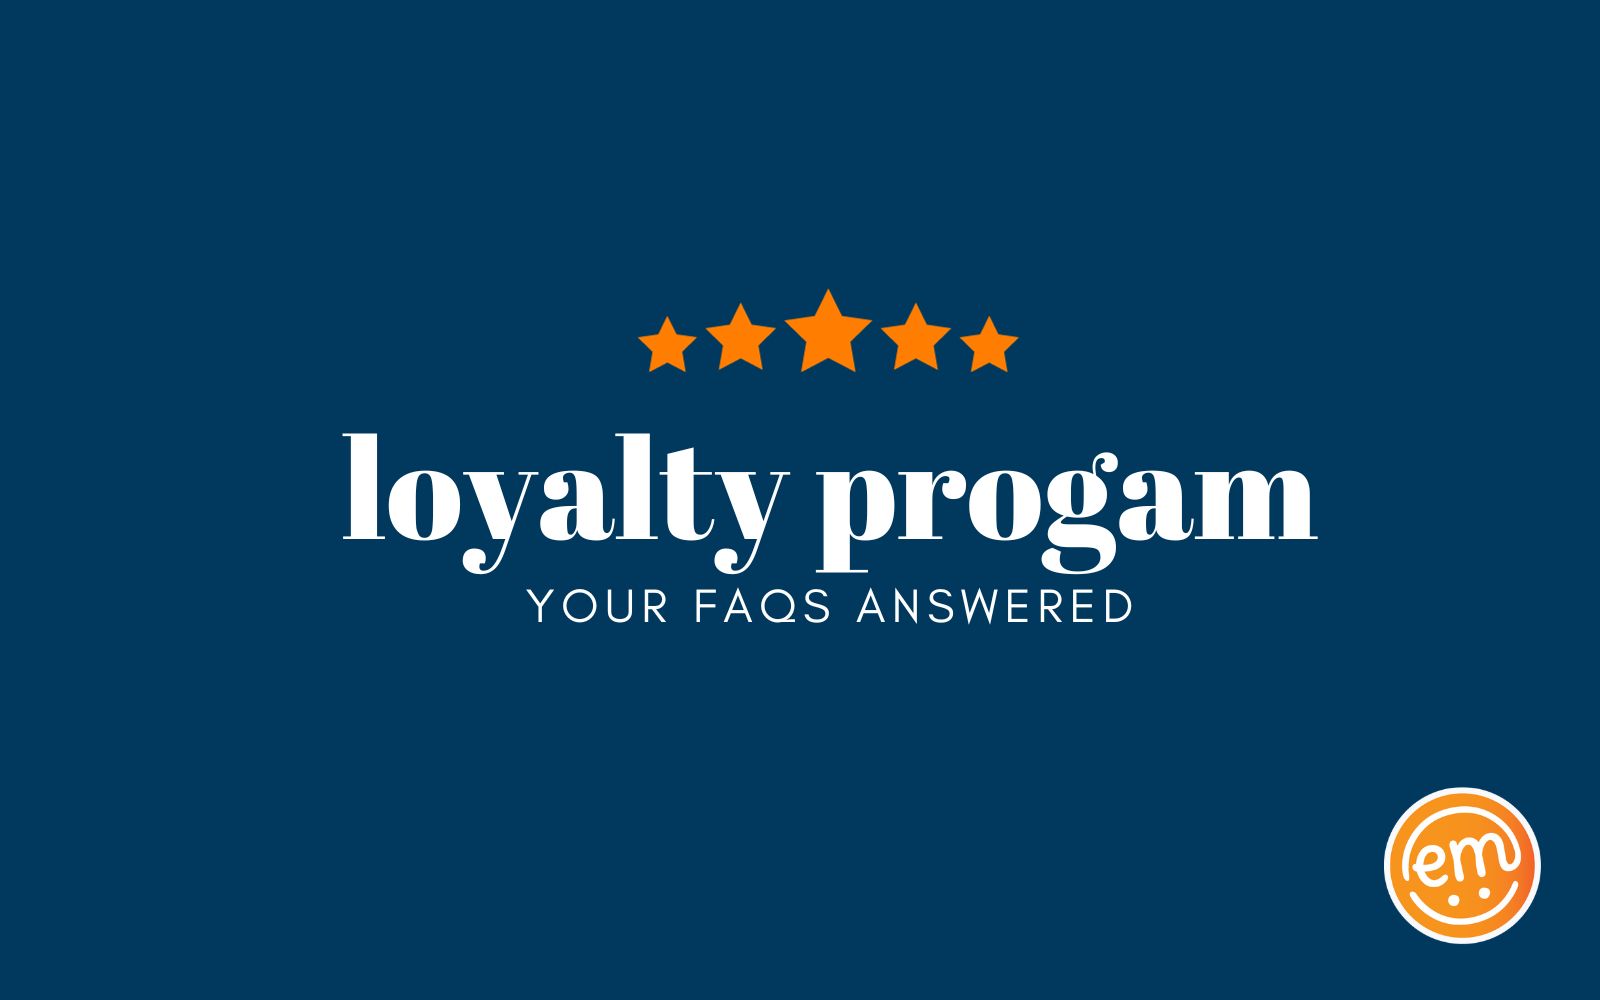 Loyalty Program: Your FAQs Answered